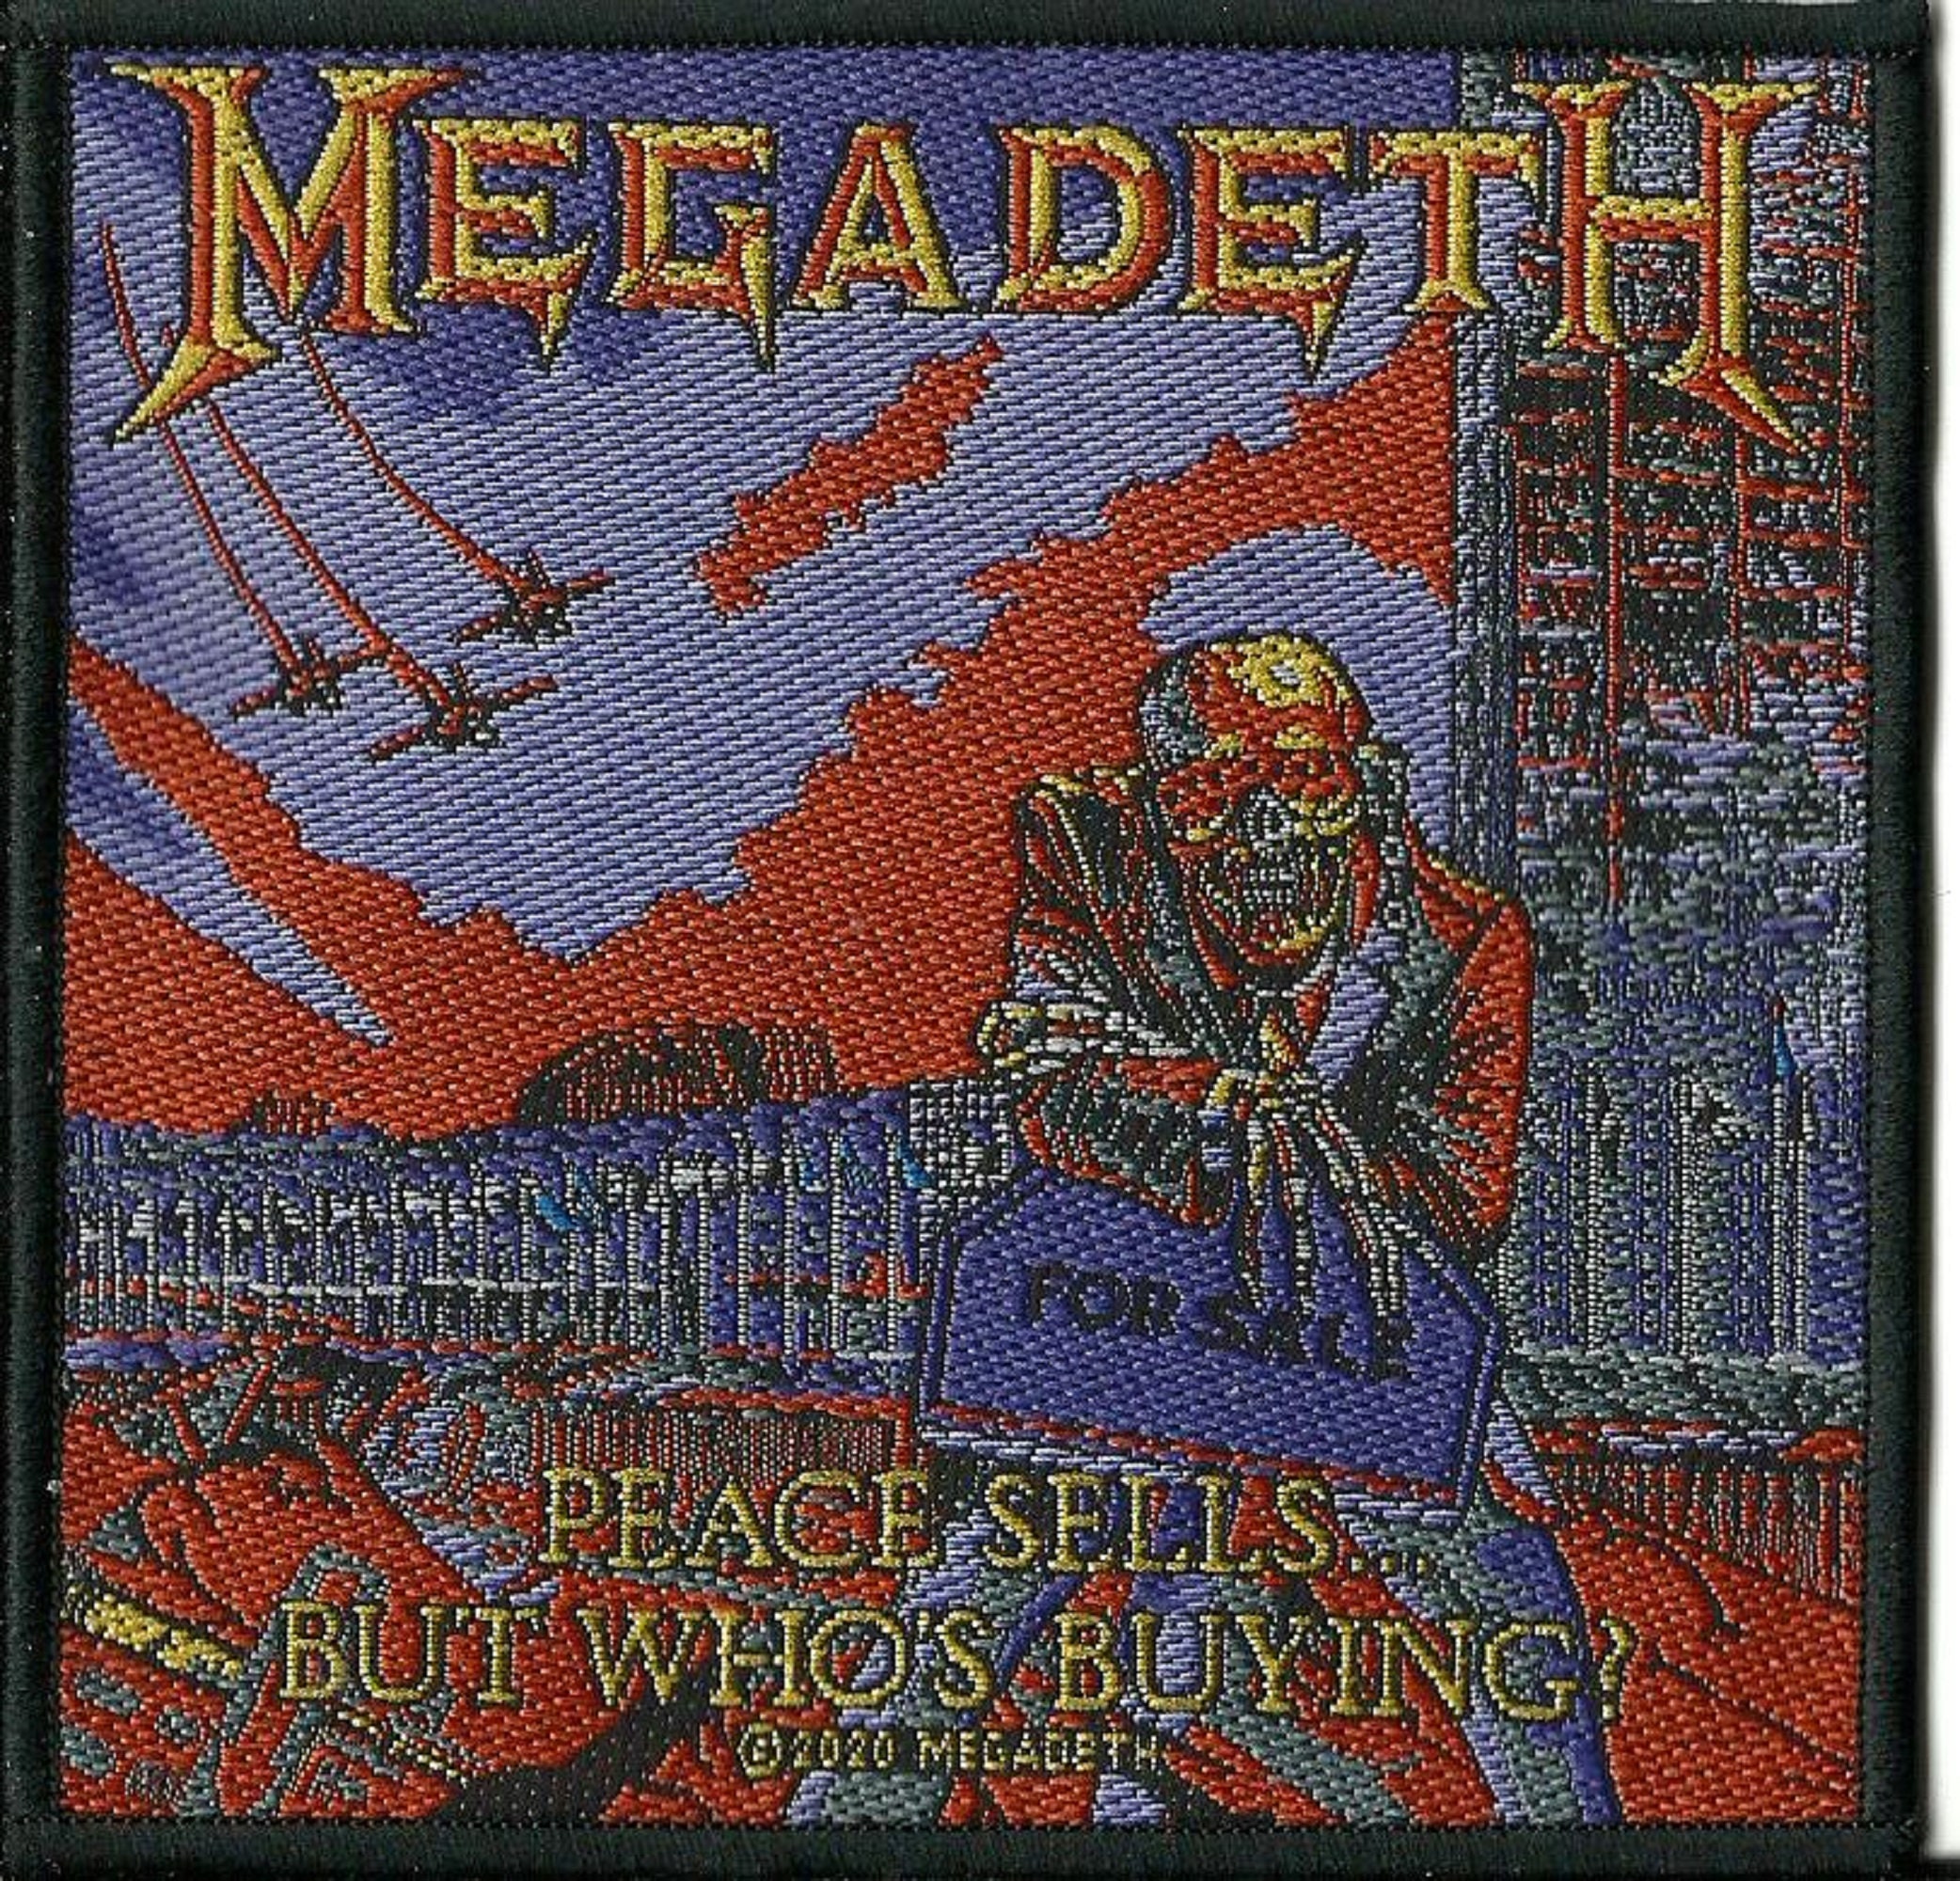 NEW 2 X 4 INCH MEGADETH IRON ON PATCH FREE SHIPPING 